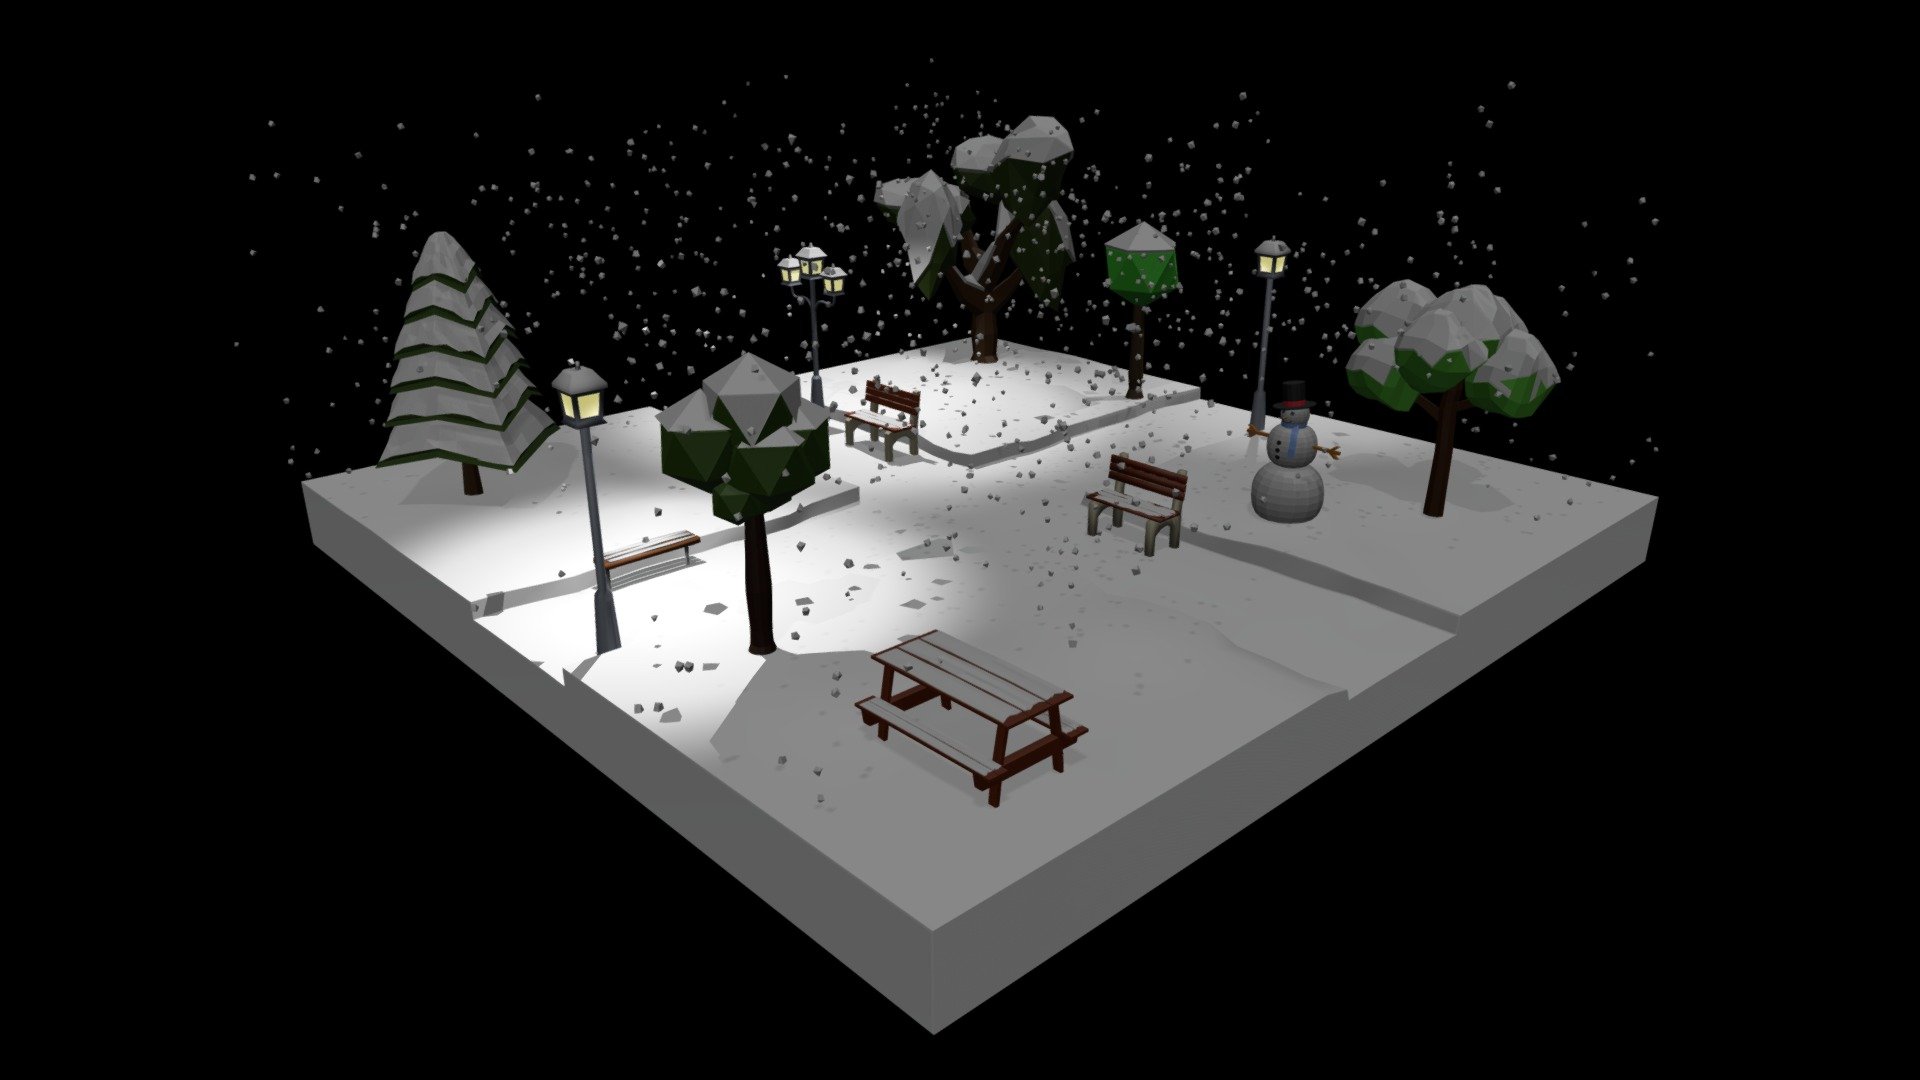 This is a low poly 3d model of a winter park at night. The low poly park was modeled and prepared for low-poly style renderings, background, general CG visualization presented as 15 objects with quads and tris

Objects

Ground Snow 5 Trees 3 Street Lamps 3 Benches 1 Picnic Table 1 Snowman

Verts : 17.796 Faces: 20.151

PLEASE NOTE The original file was created in blender. You will receive a 3DS, OBJ, FBX, blend, DAE, STL, the exported models have simple materials with diffuse colors, the shaders of the presentation images are only included in the .blend file

Warning: Depending on which software package you are using, the exchange formats may not match the preview images exactly. Due to the nature of these formats, there may be triangulated geometry

All preview images were rendered with Blender Cycles. Product is ready to render out-of-the-box. Please note that the lights, cameras, and background is only included in the .blend file. The model is clean and alone in the other provided files, centered at origin - Low Poly Cartoon Winter Park at Night - Buy Royalty Free 3D model by chroma3d (@vendol21) 3d model